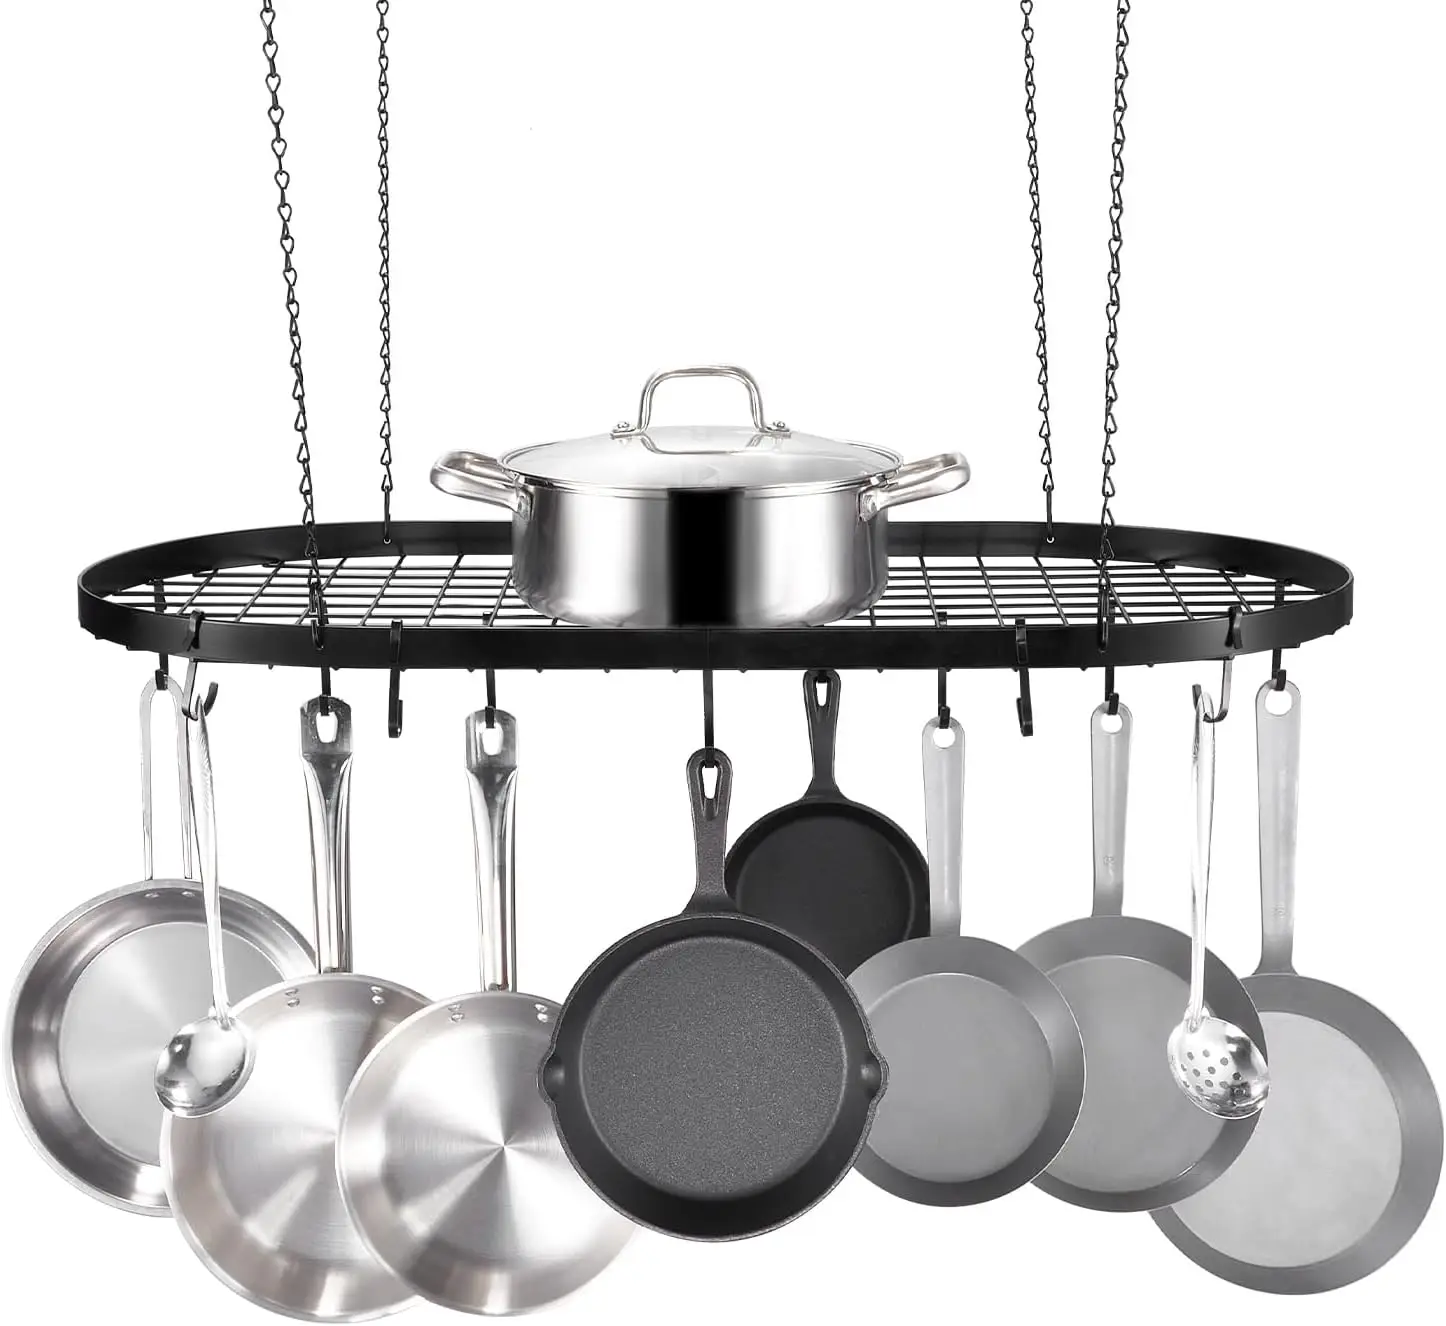 

Black Carbon Steel Ceiling Mounted Pot Rack with 12/20 Hooks, 80 lbs Load Capacity, Ideal for Home, Restaurant, Kitchen Cookware